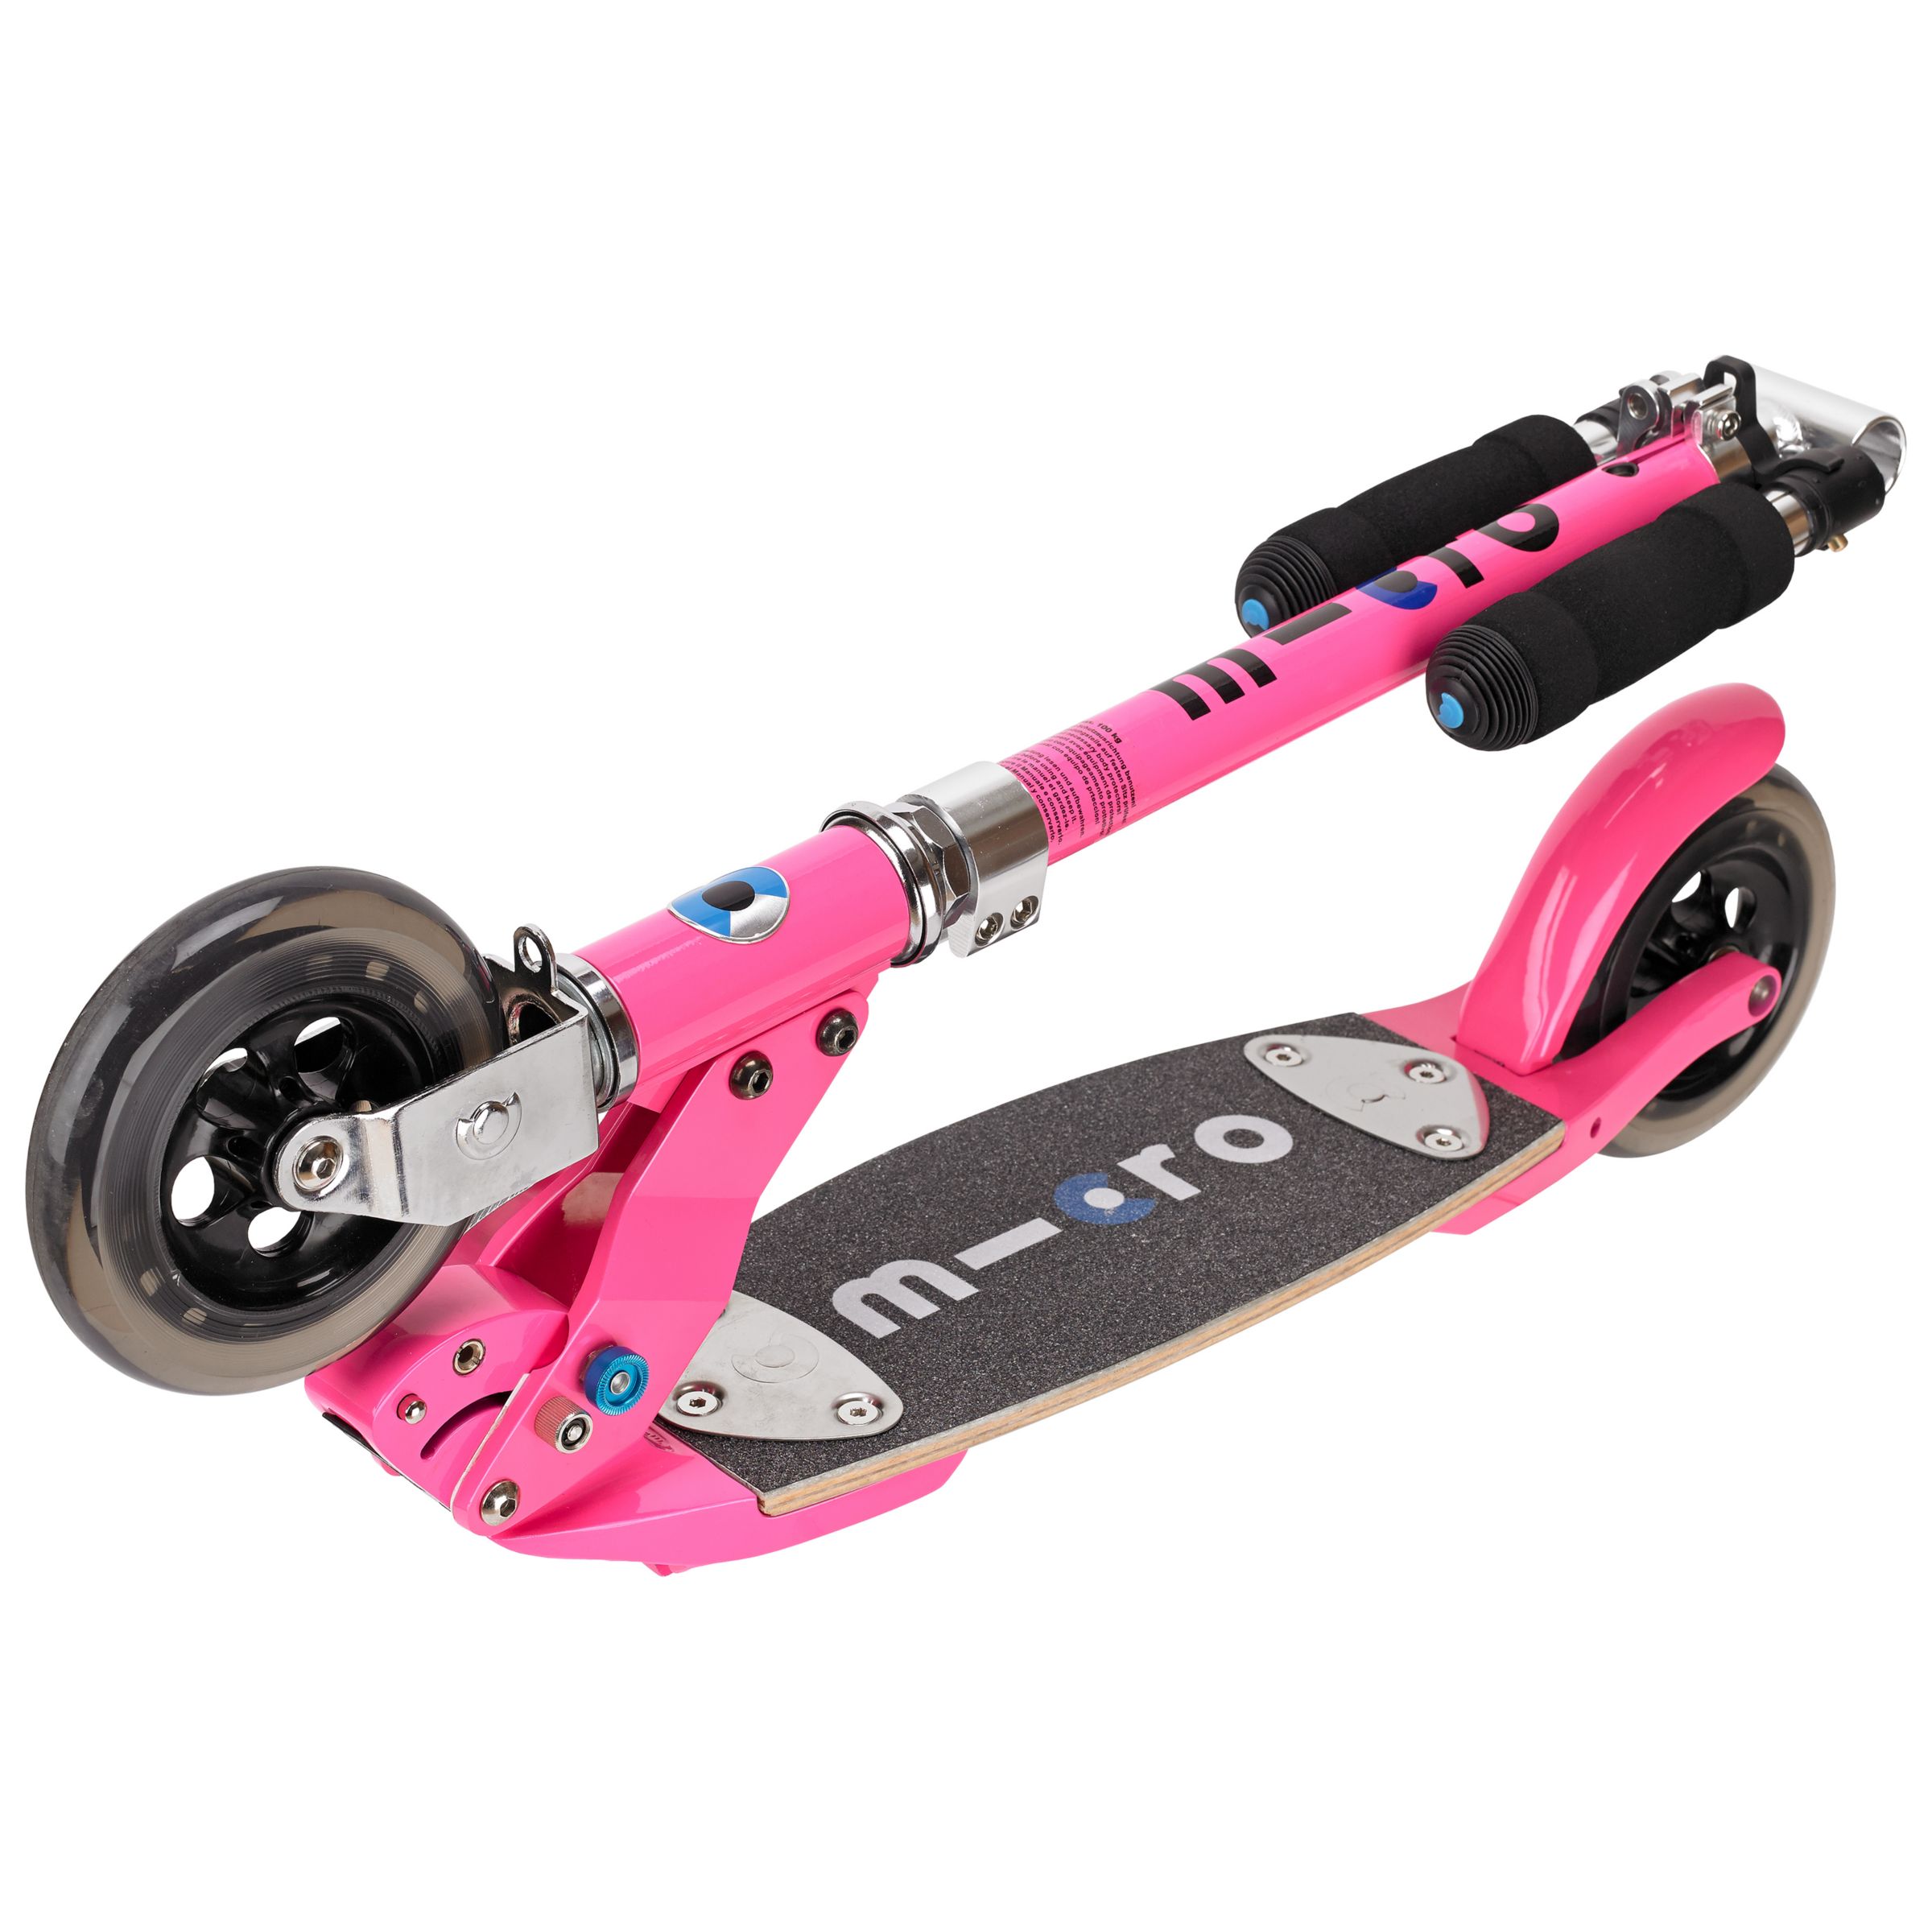 Micro Flex Scooter Adult